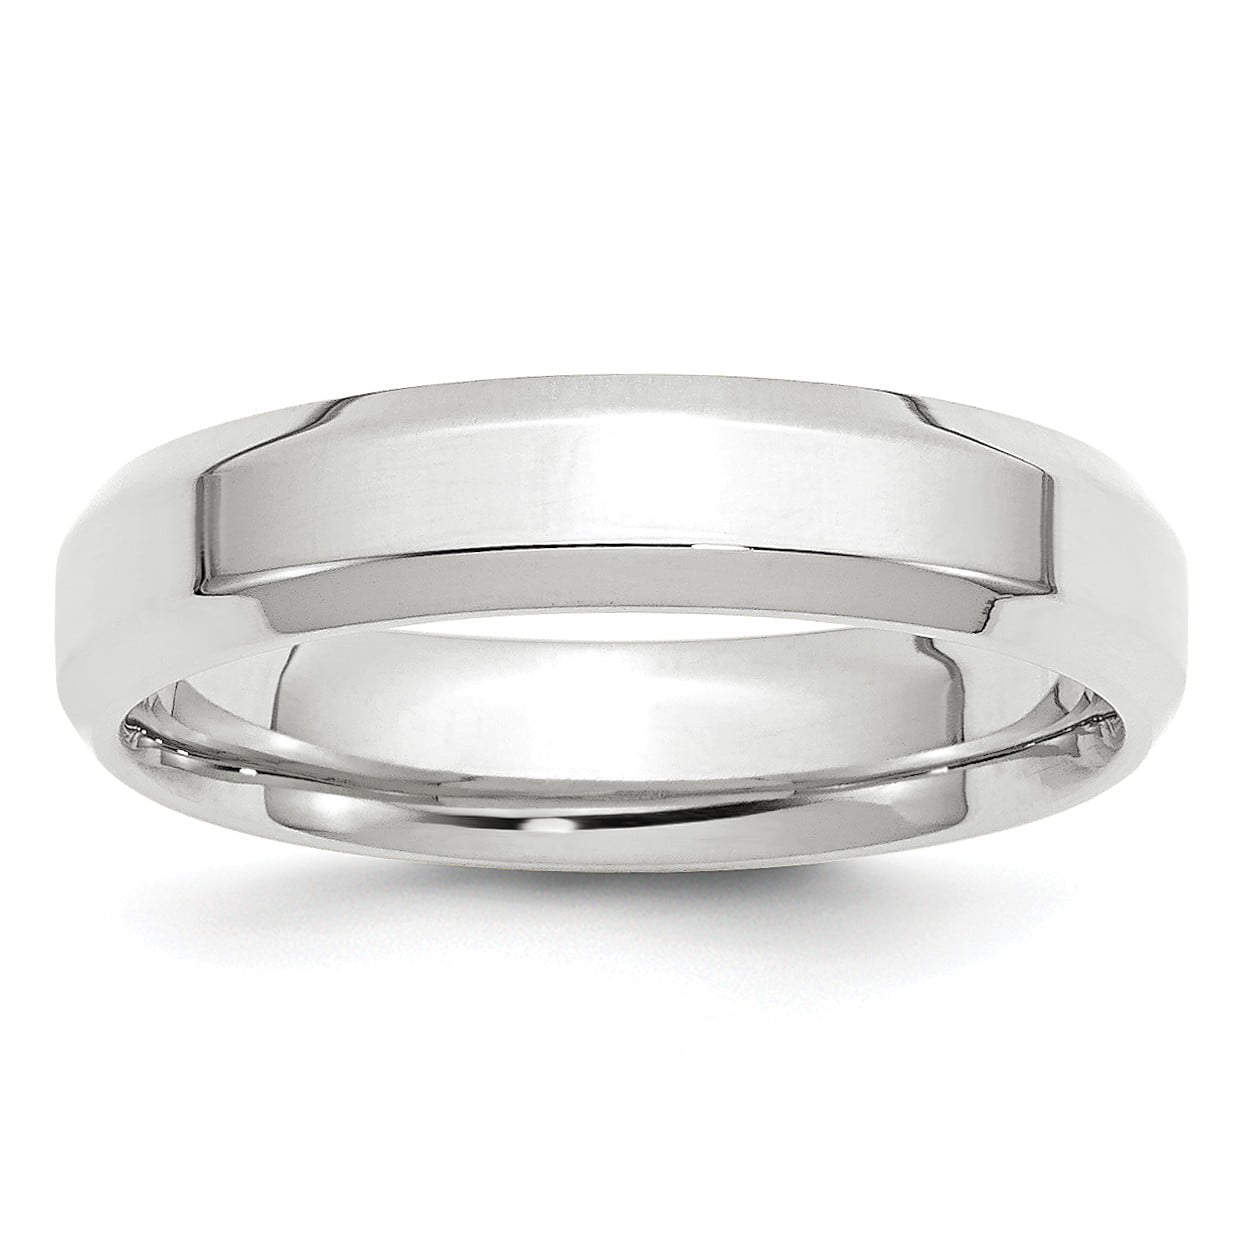 Solid 10k White Gold 5mm Bevel Edge Comfort Fit Wedding Band